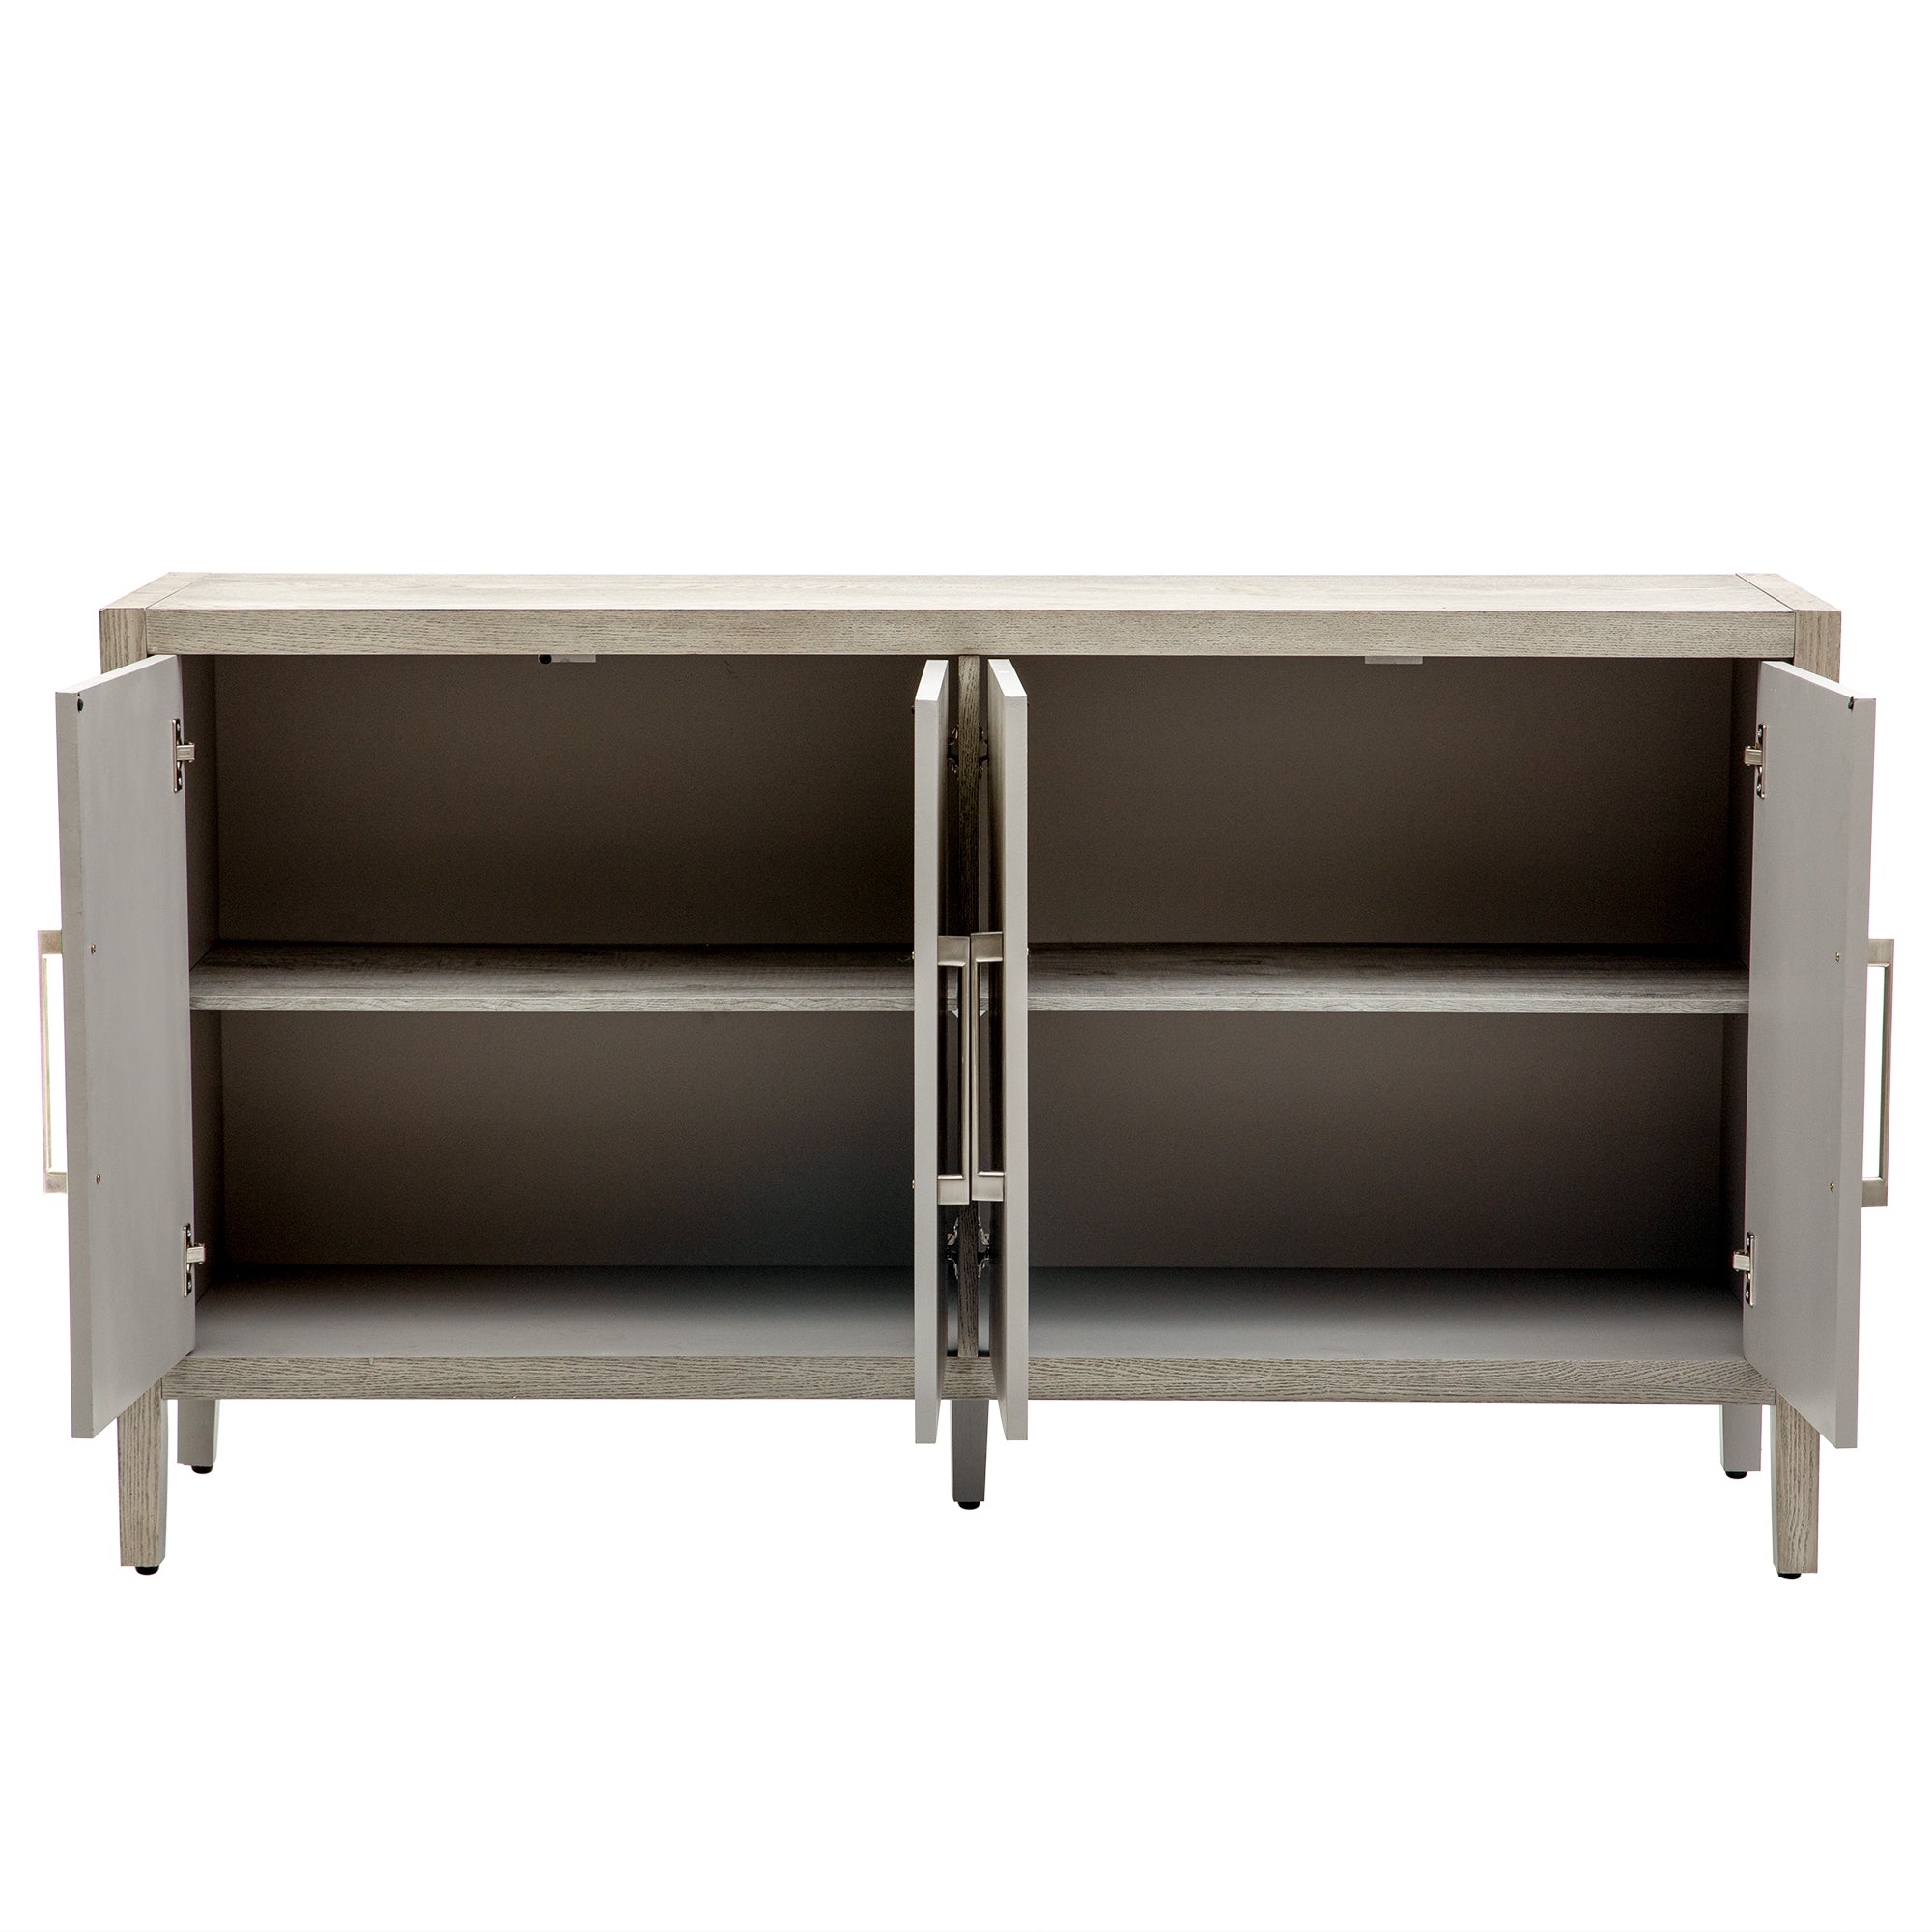 U STYLE Storage Cabinet Sideboard Wooden Cabinet with gray-mdf